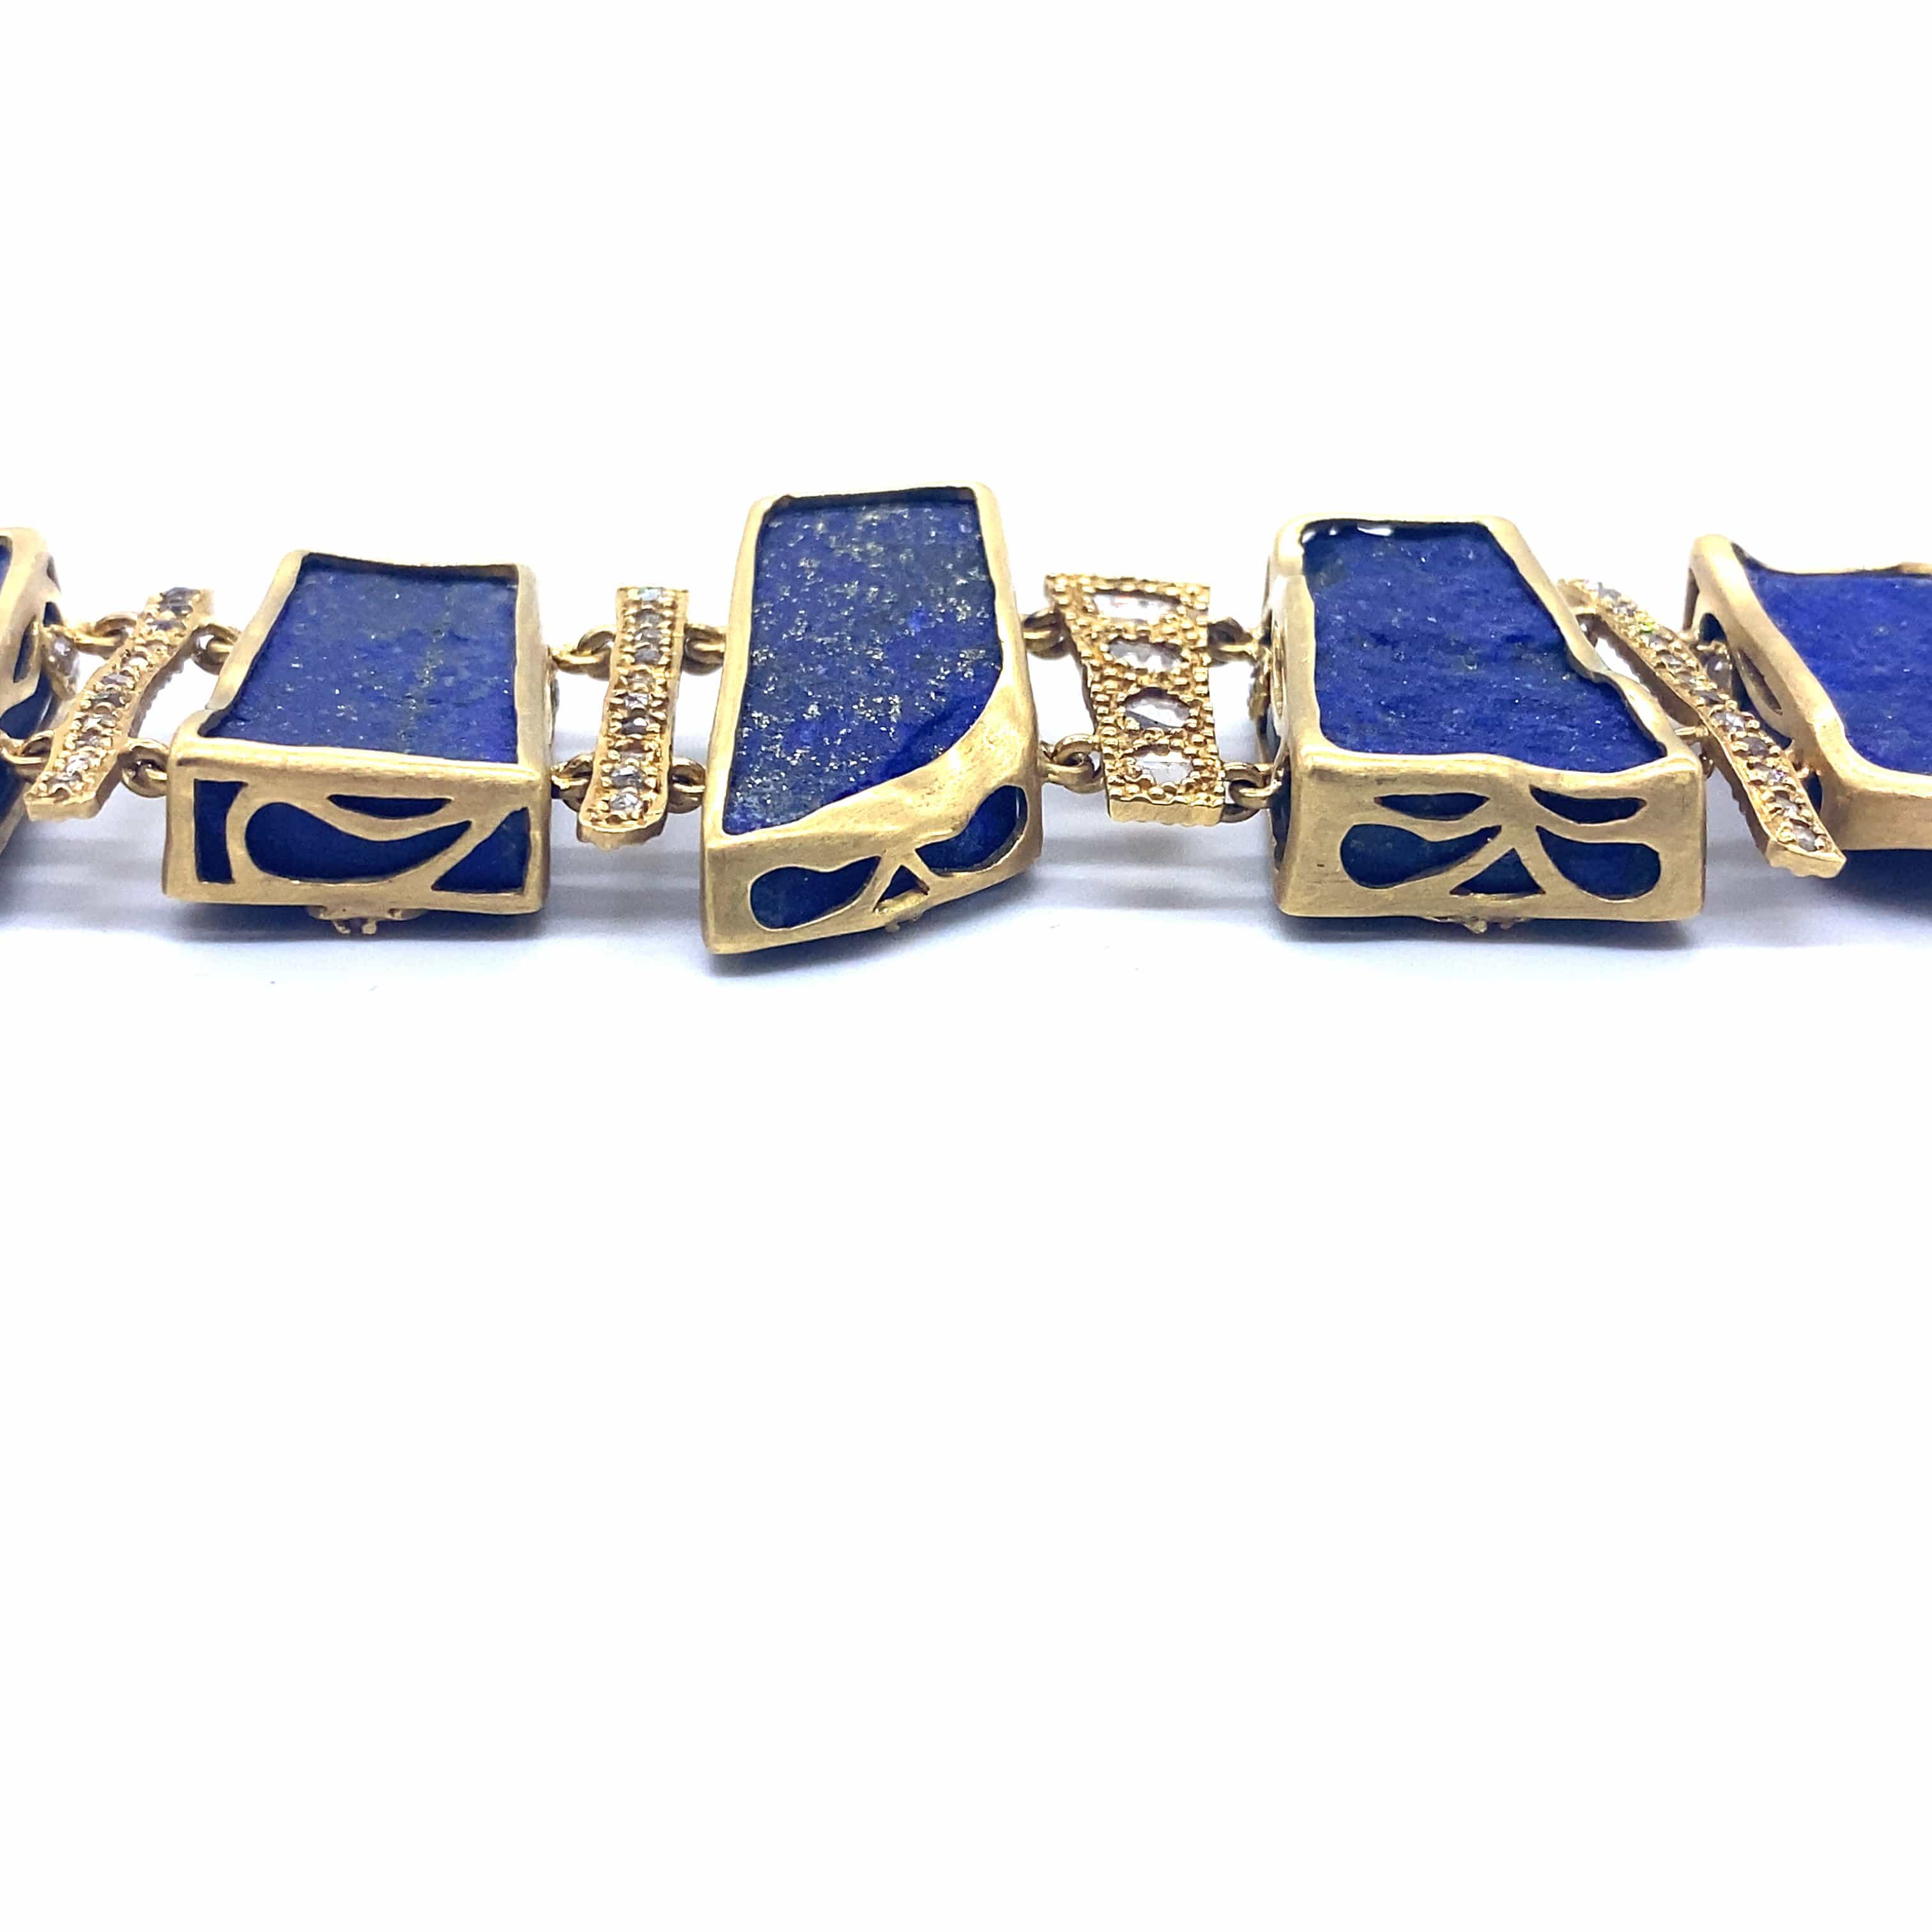 Antiquity Ladder Bracelet Set with Lapis, Alternating Gold Bars, and Diamonds - Coomi